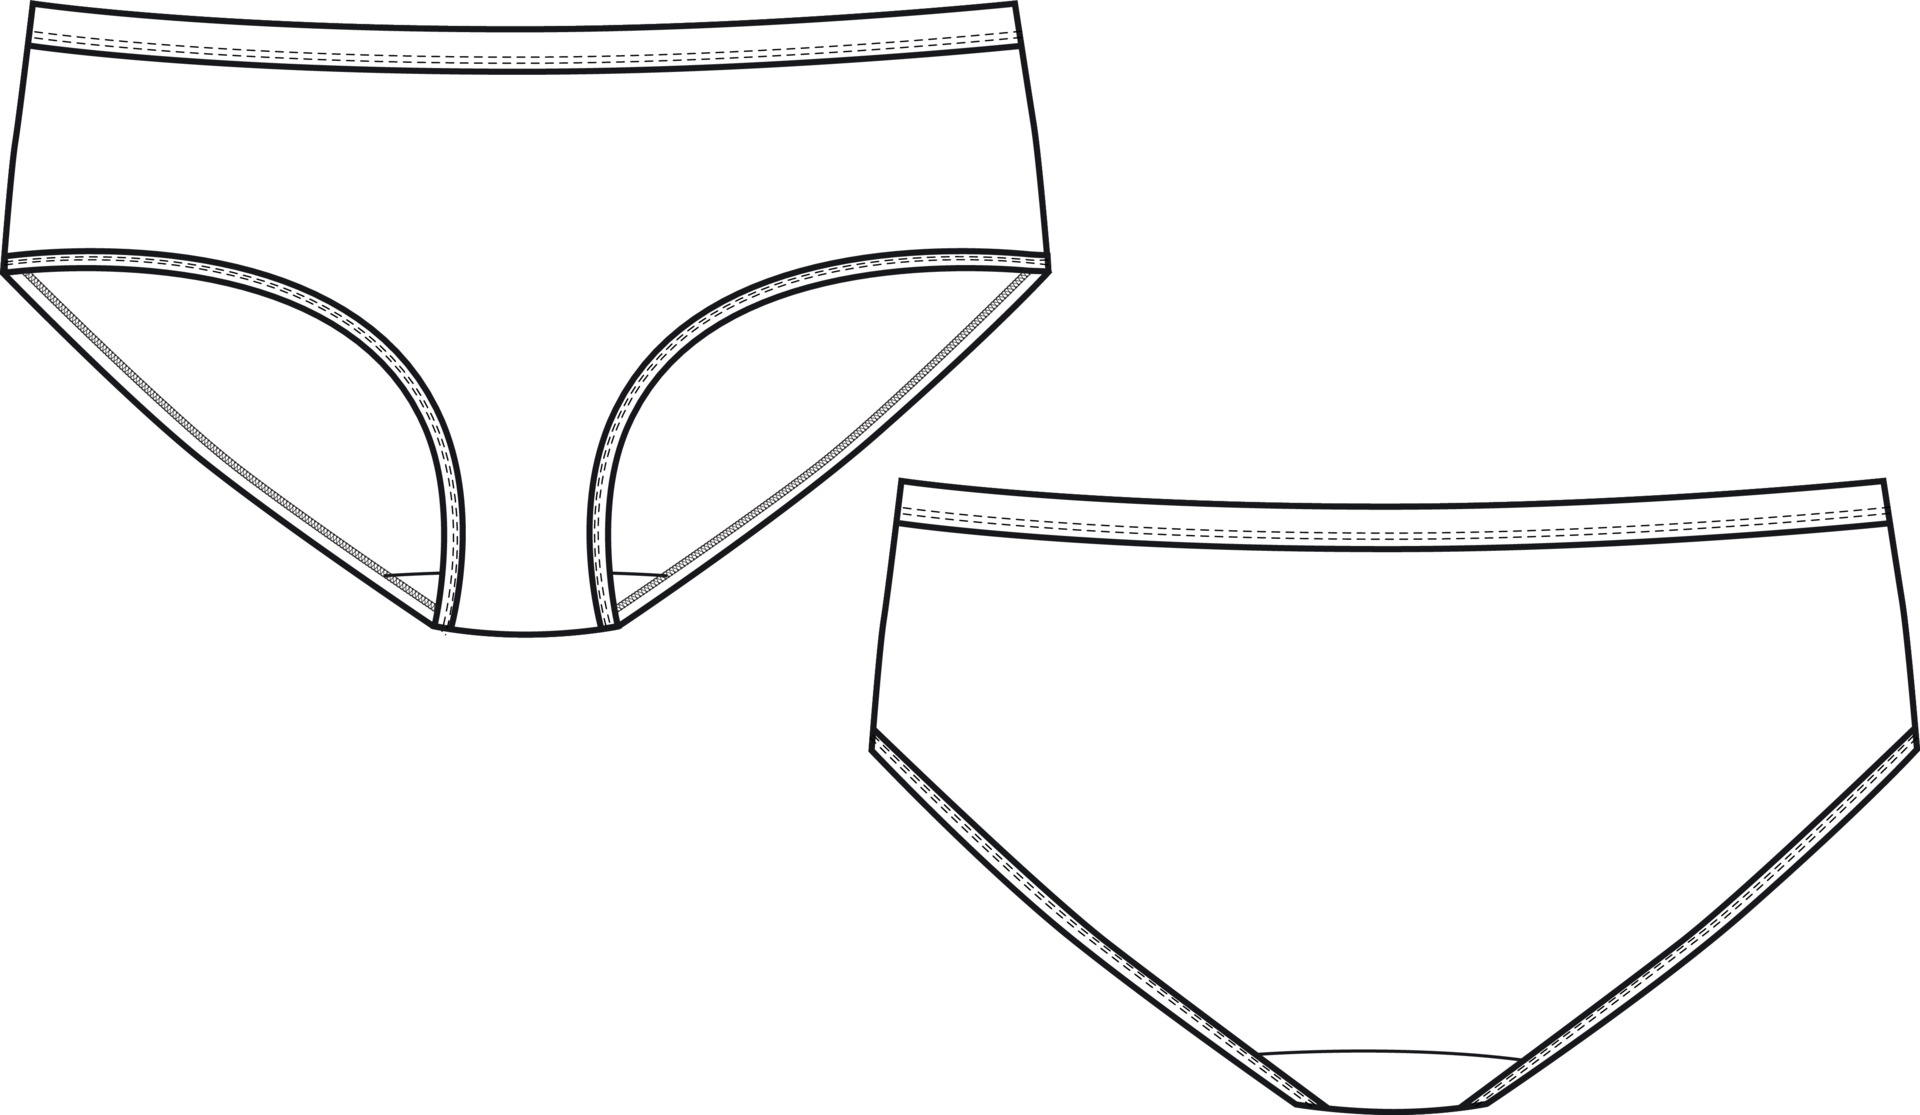 https://static.vecteezy.com/system/resources/previews/003/331/030/original/hipster-underwear-technical-brief-panty-flat-fashion-sketch-vector.jpg